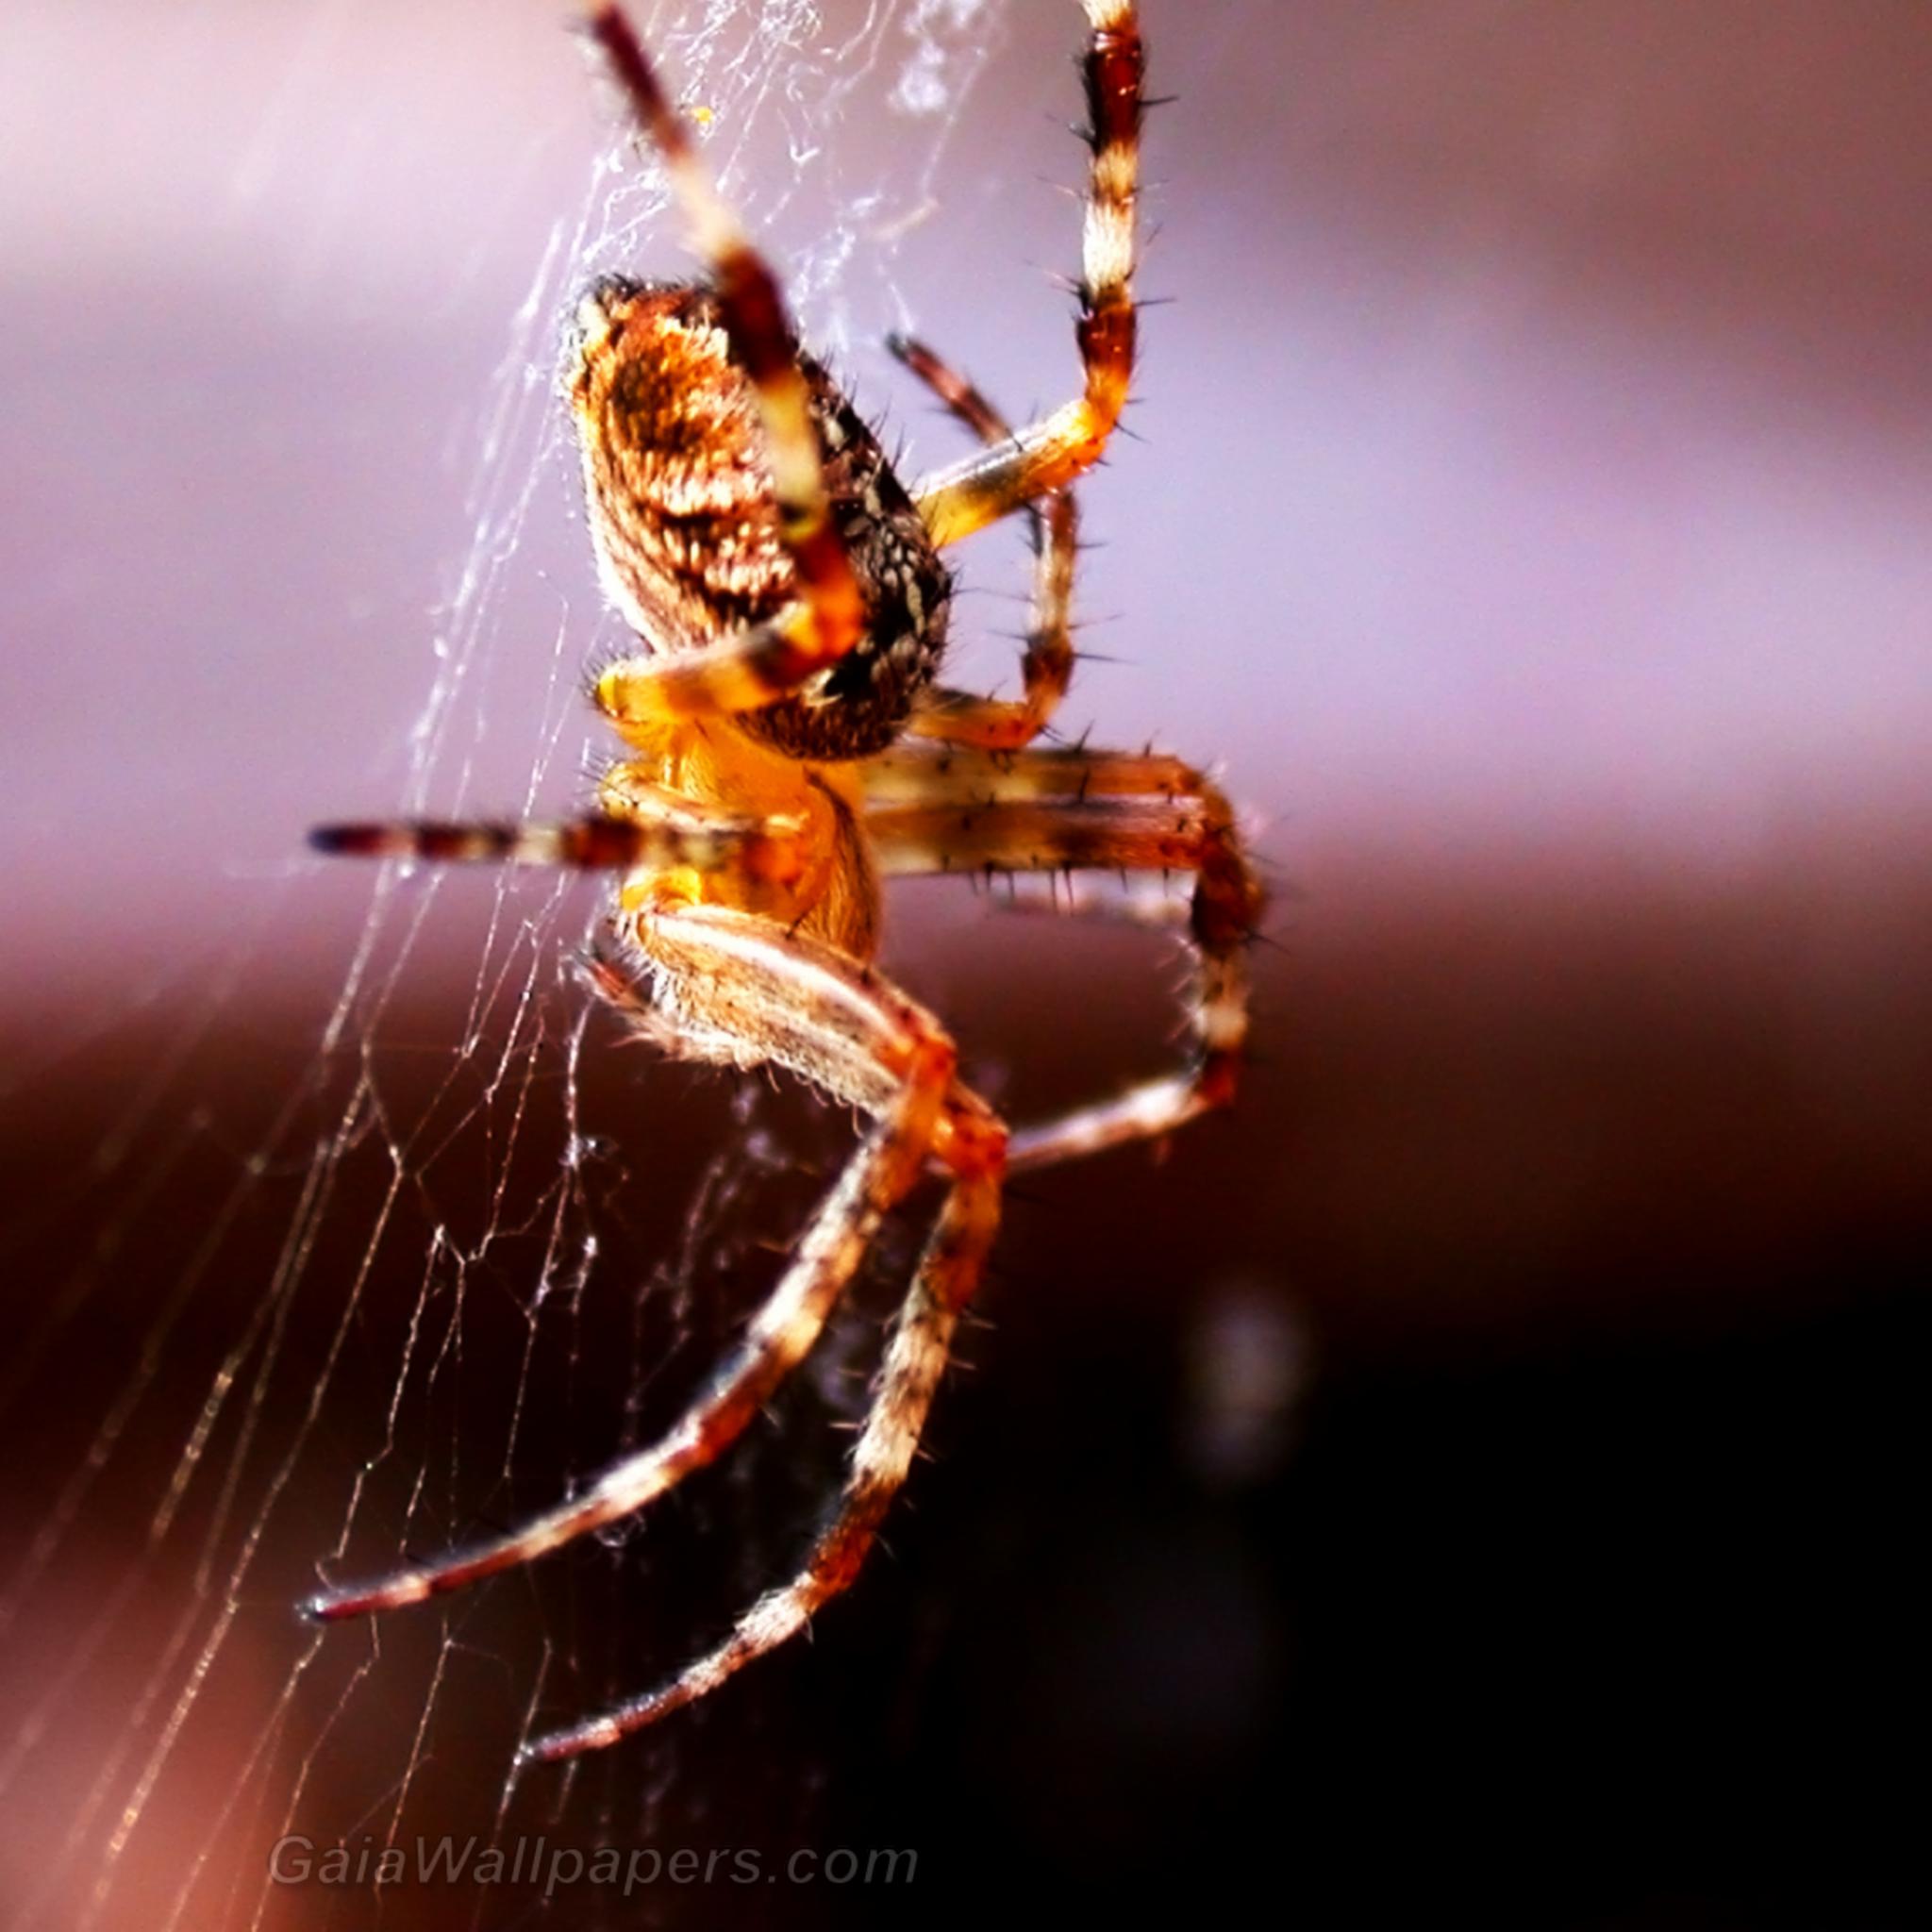 Scary spider going down - Free desktop wallpapers